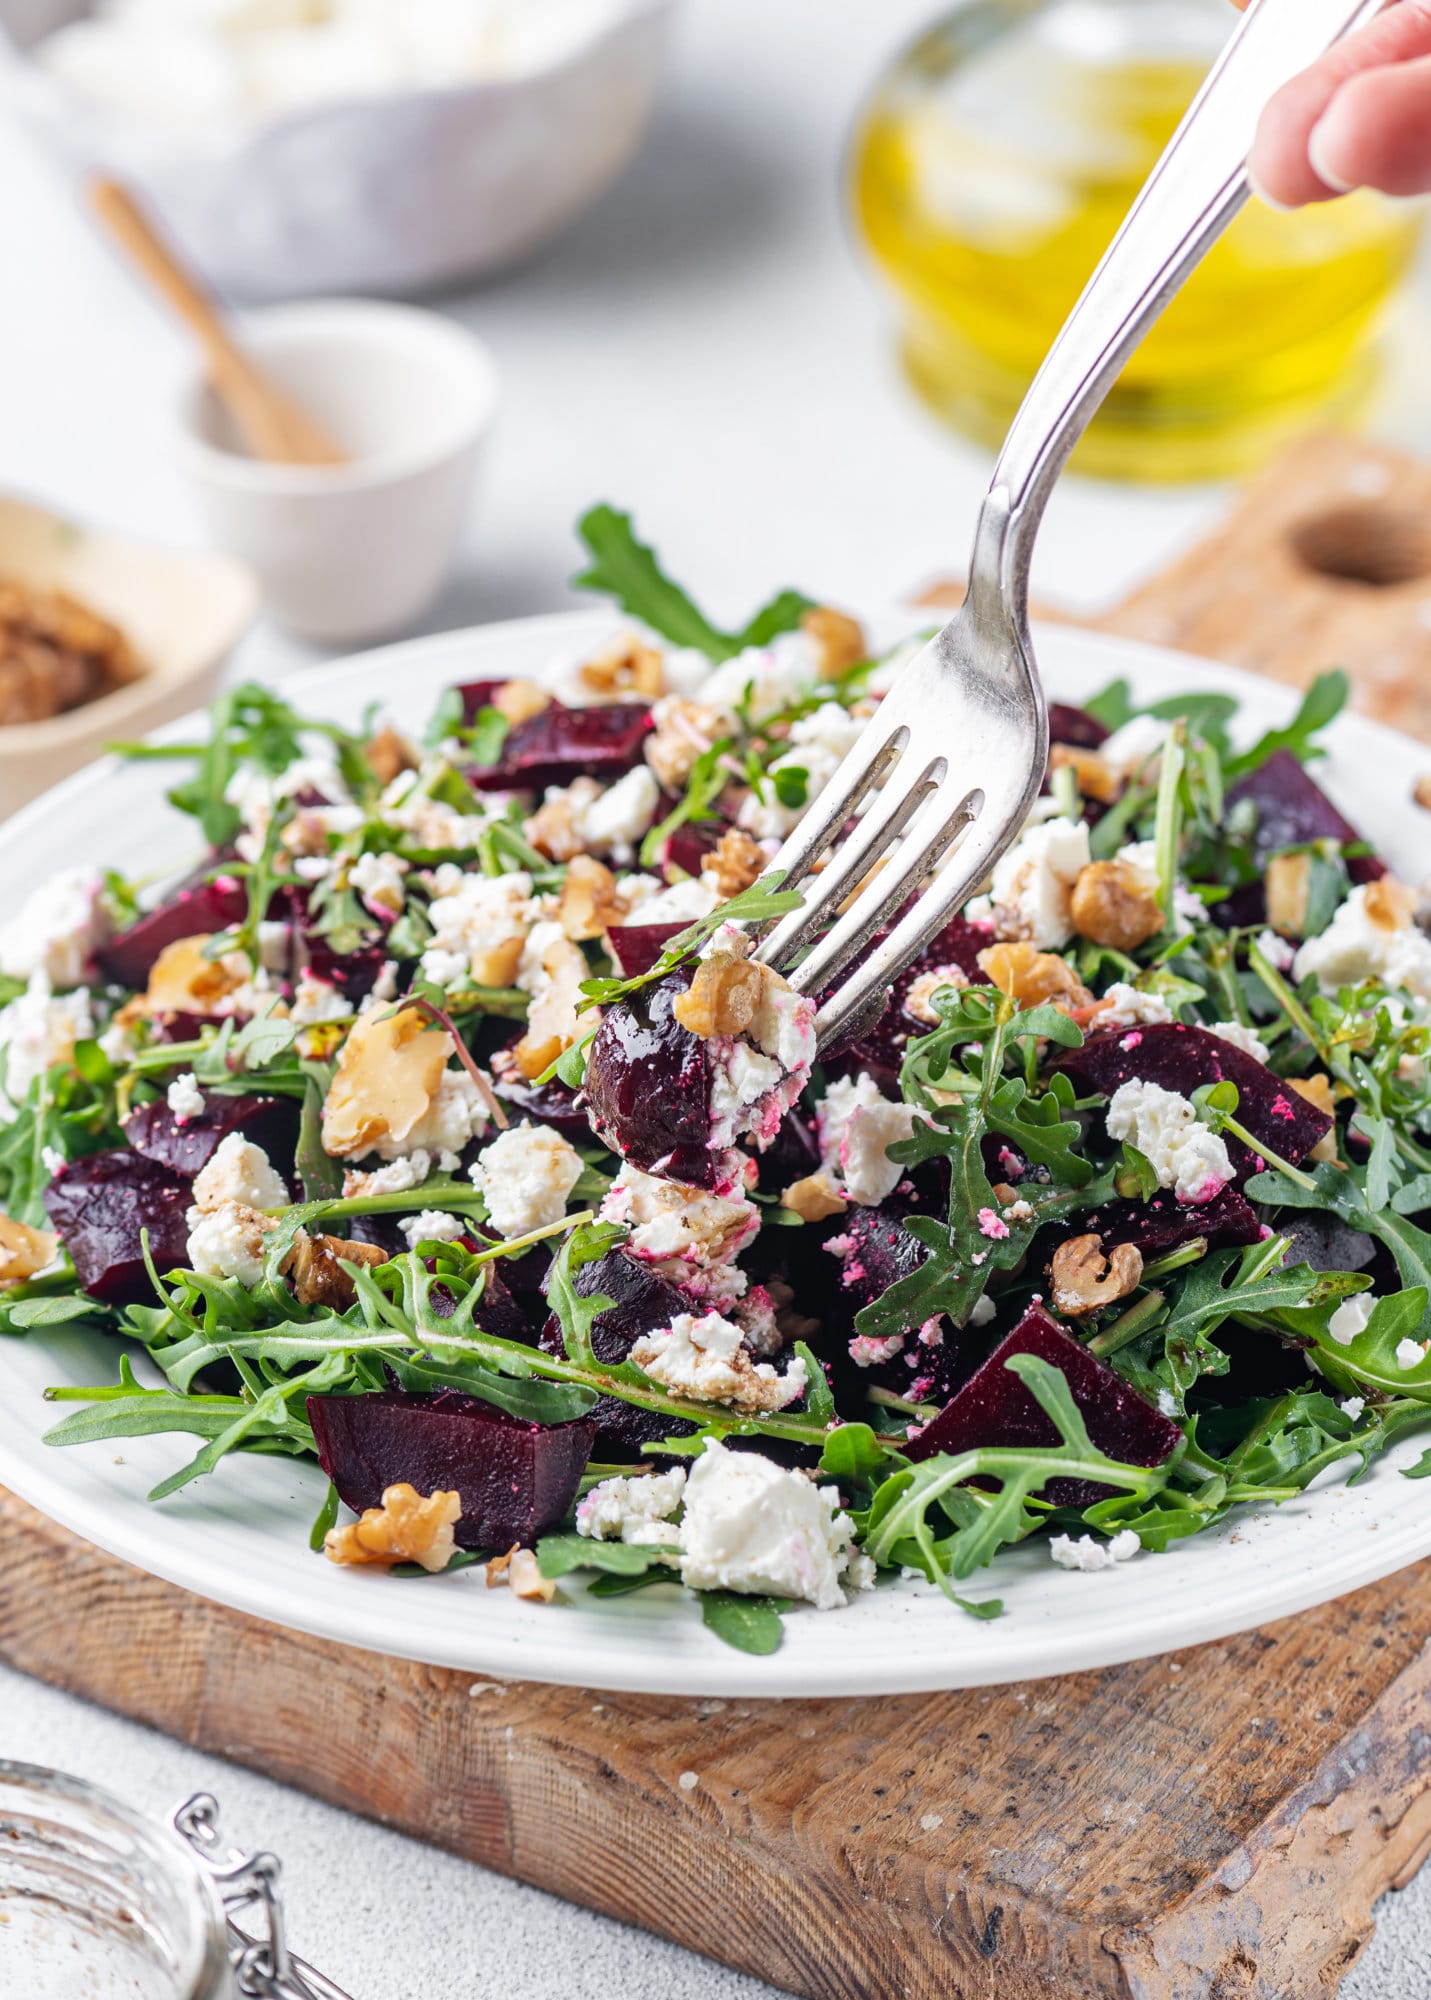 beet-salad-on-a-white-plate-and-wooden-board-with-cheese-and-arugula-and-fork